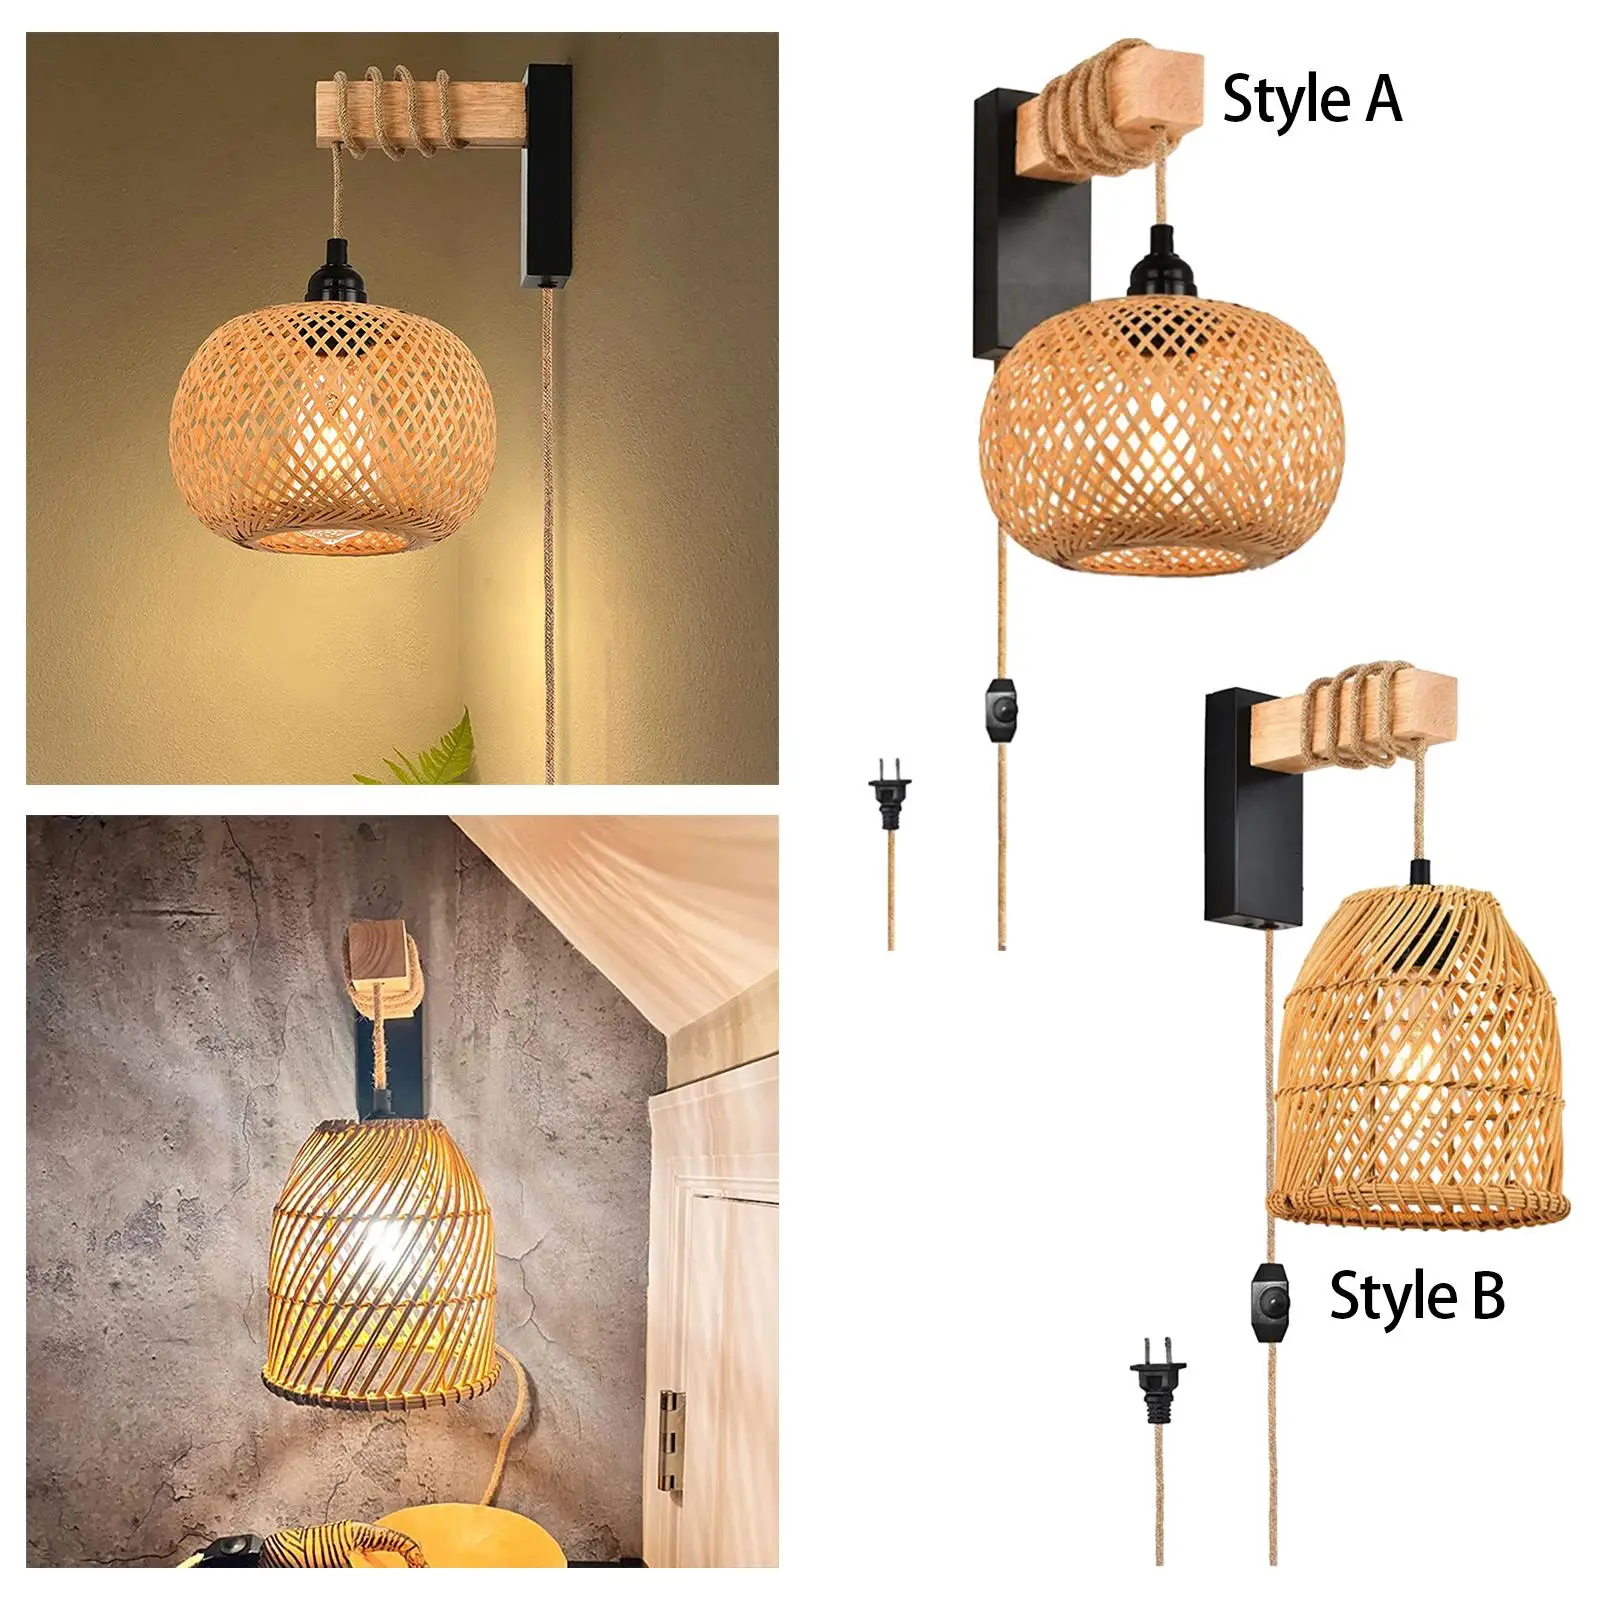 Wall Lamp Dimmable Sconces E27 Lamp Socket Boho Plug in Wall Sconce Wall Light for Bedroom Living Room Cafe Farmhouse House